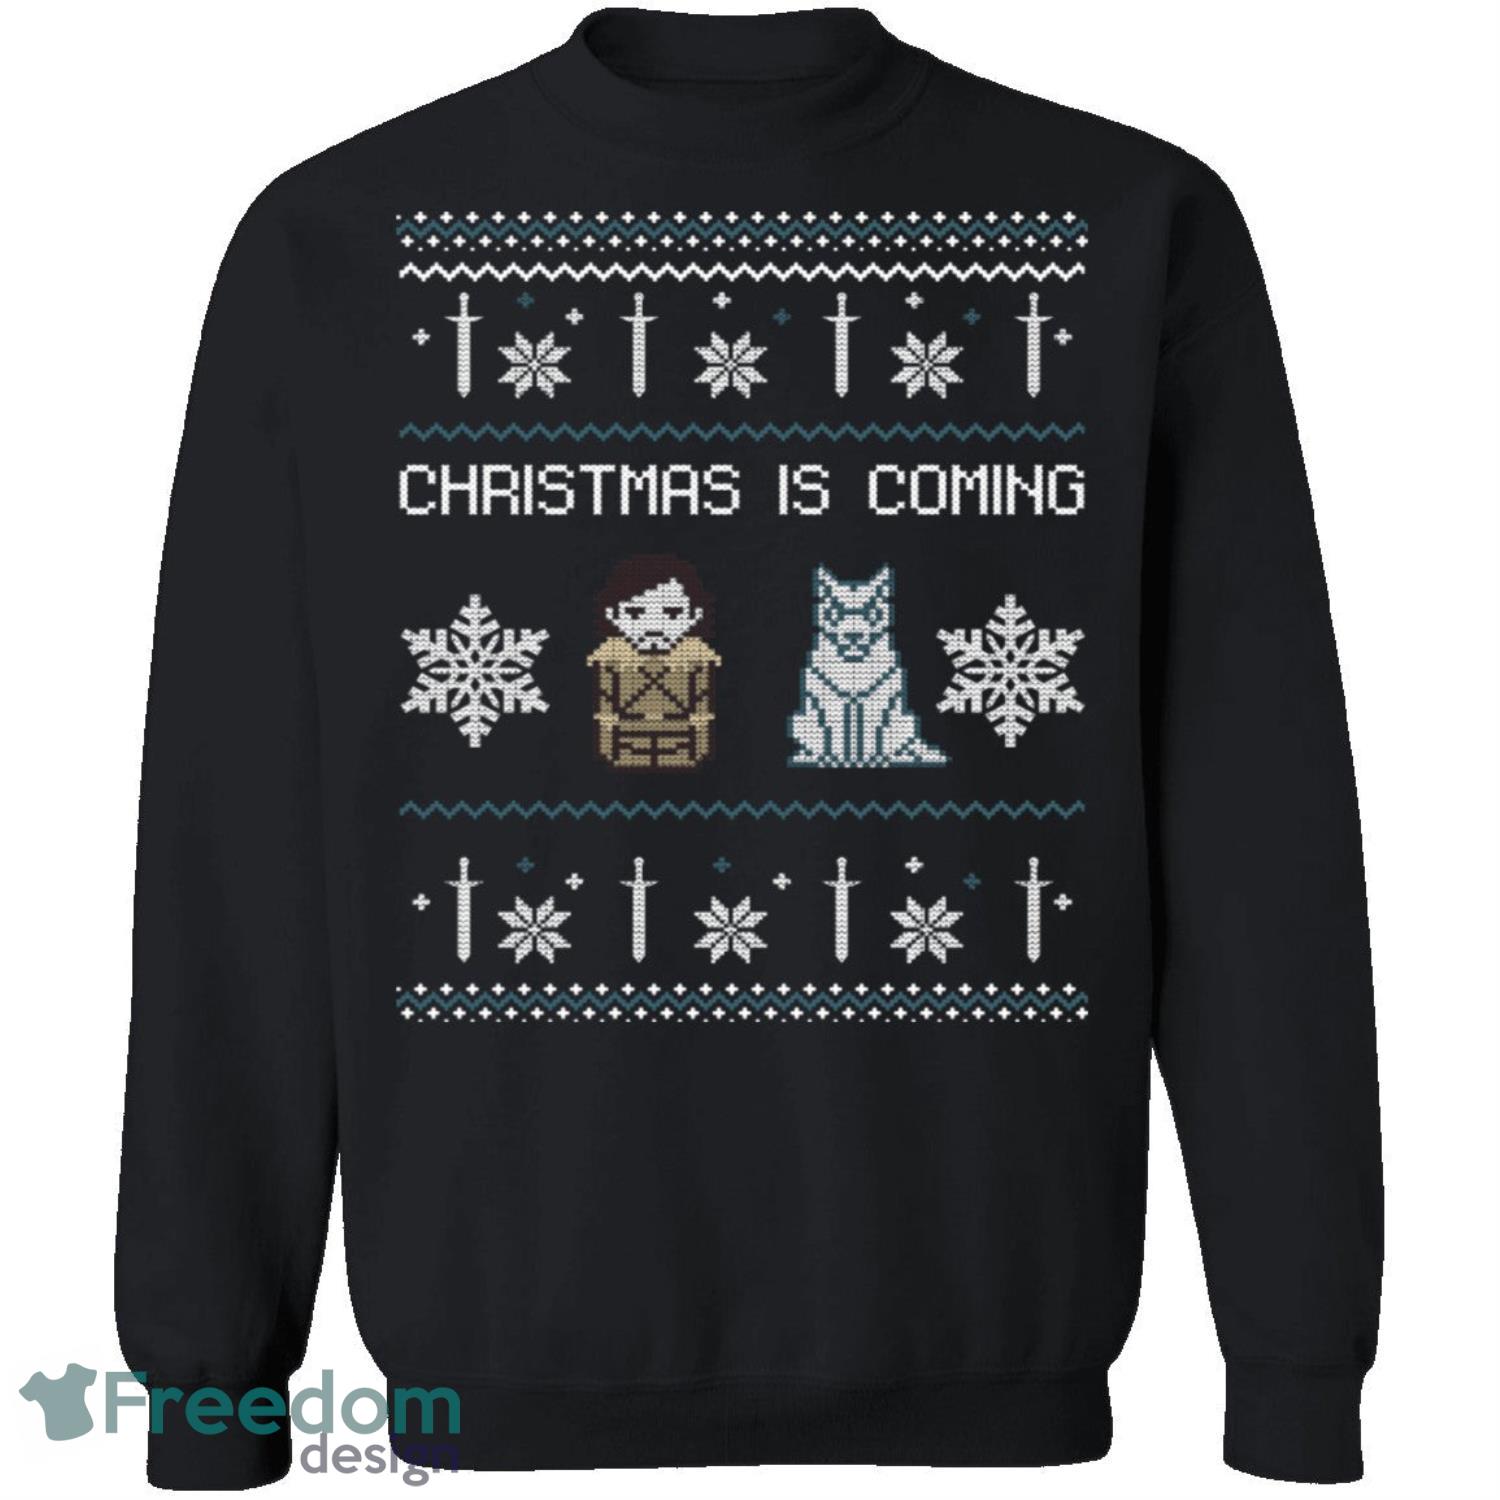 Christmas Is Coming Knitting Pattern Ugly Christmas Sweatshirt - christmas-is-coming-knitting-pattern-ugly-christmas-sweatshirt-2